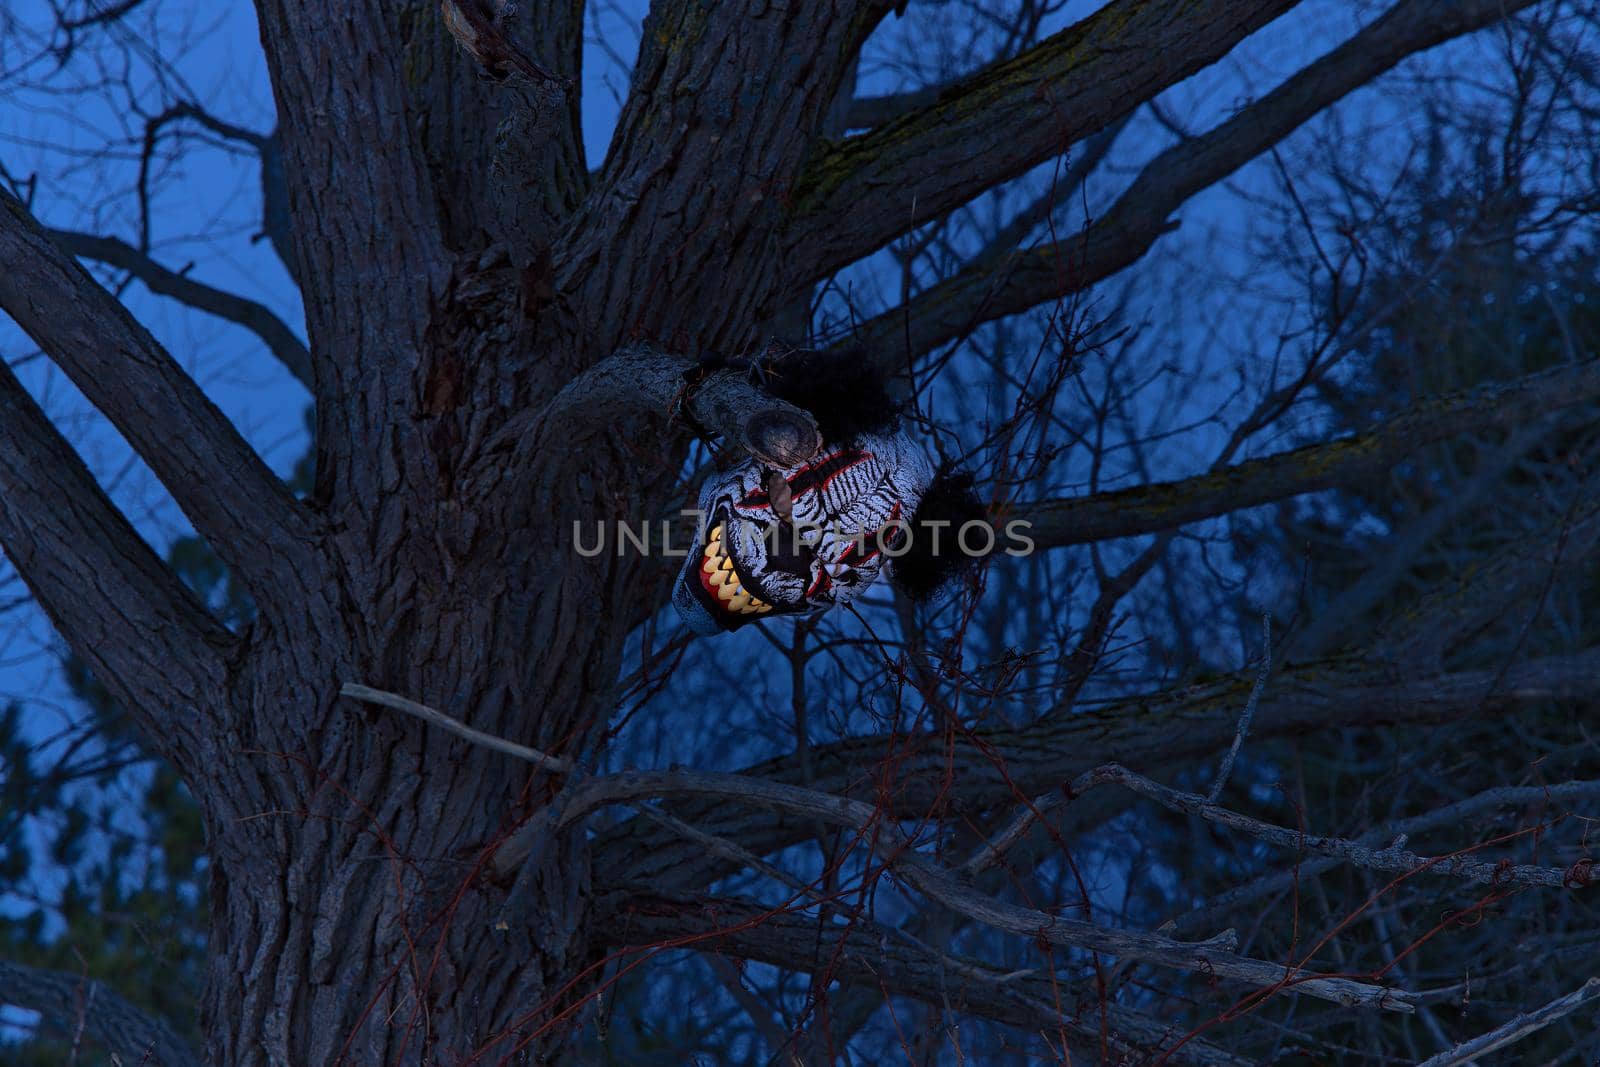 Terrifying Scary Clown Mask with Large Fangs Glows in a Spooky Tree with at Twilight or Night by markvandam